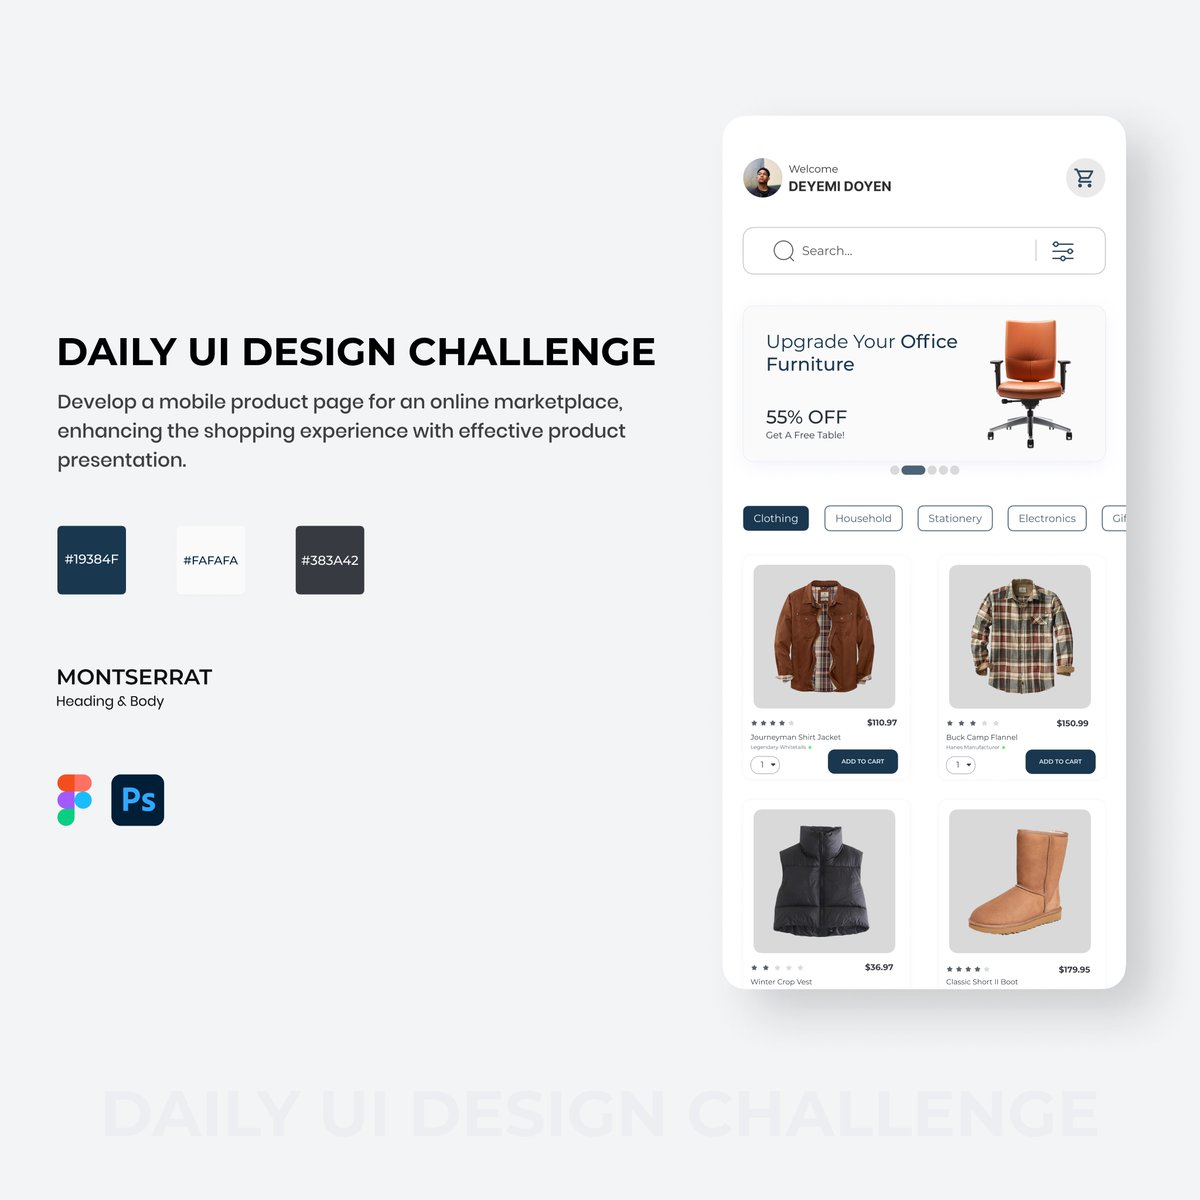 Daily UI Design Challenge - today’s task was to design a mobile product page for an online marketplace.

Kindly share your feedback in the comments section 🙏🏾

#onboardingdesign #uidesign #uidesigner #uiux #uidailychallenge #ecommerce #ecommerceapp